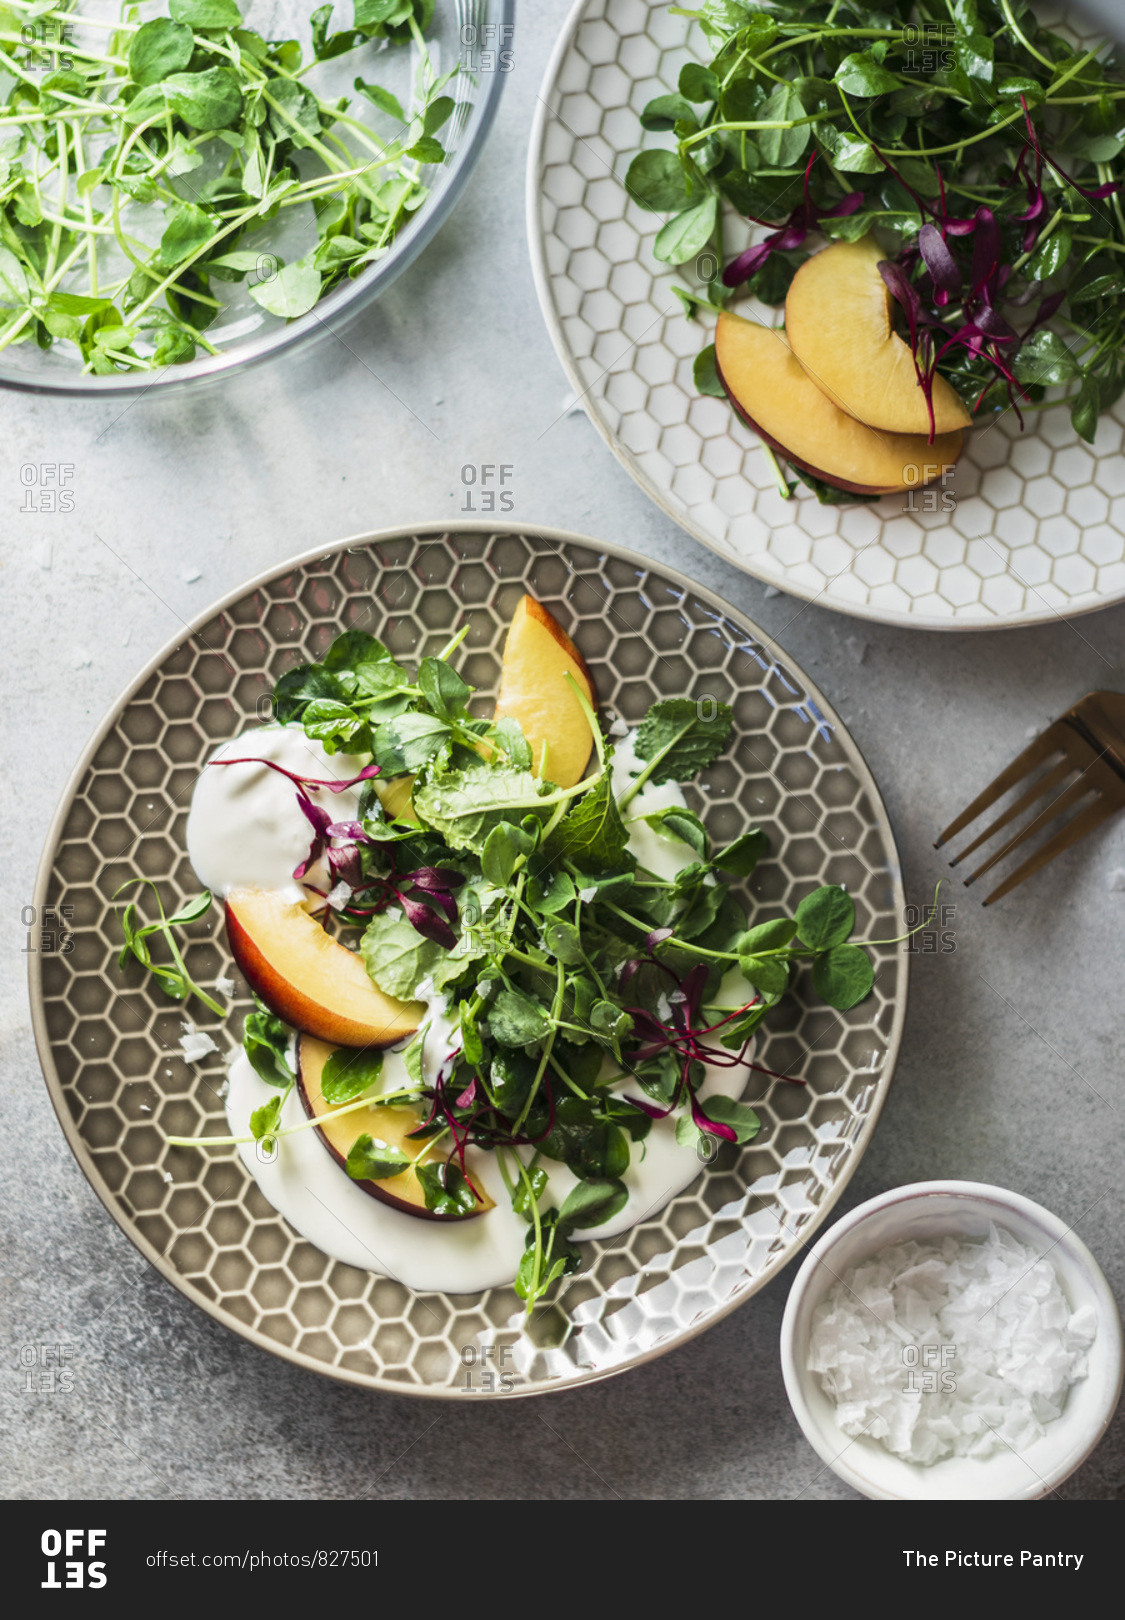 Ricotta salad with peaches and micro greens served on the gray plate